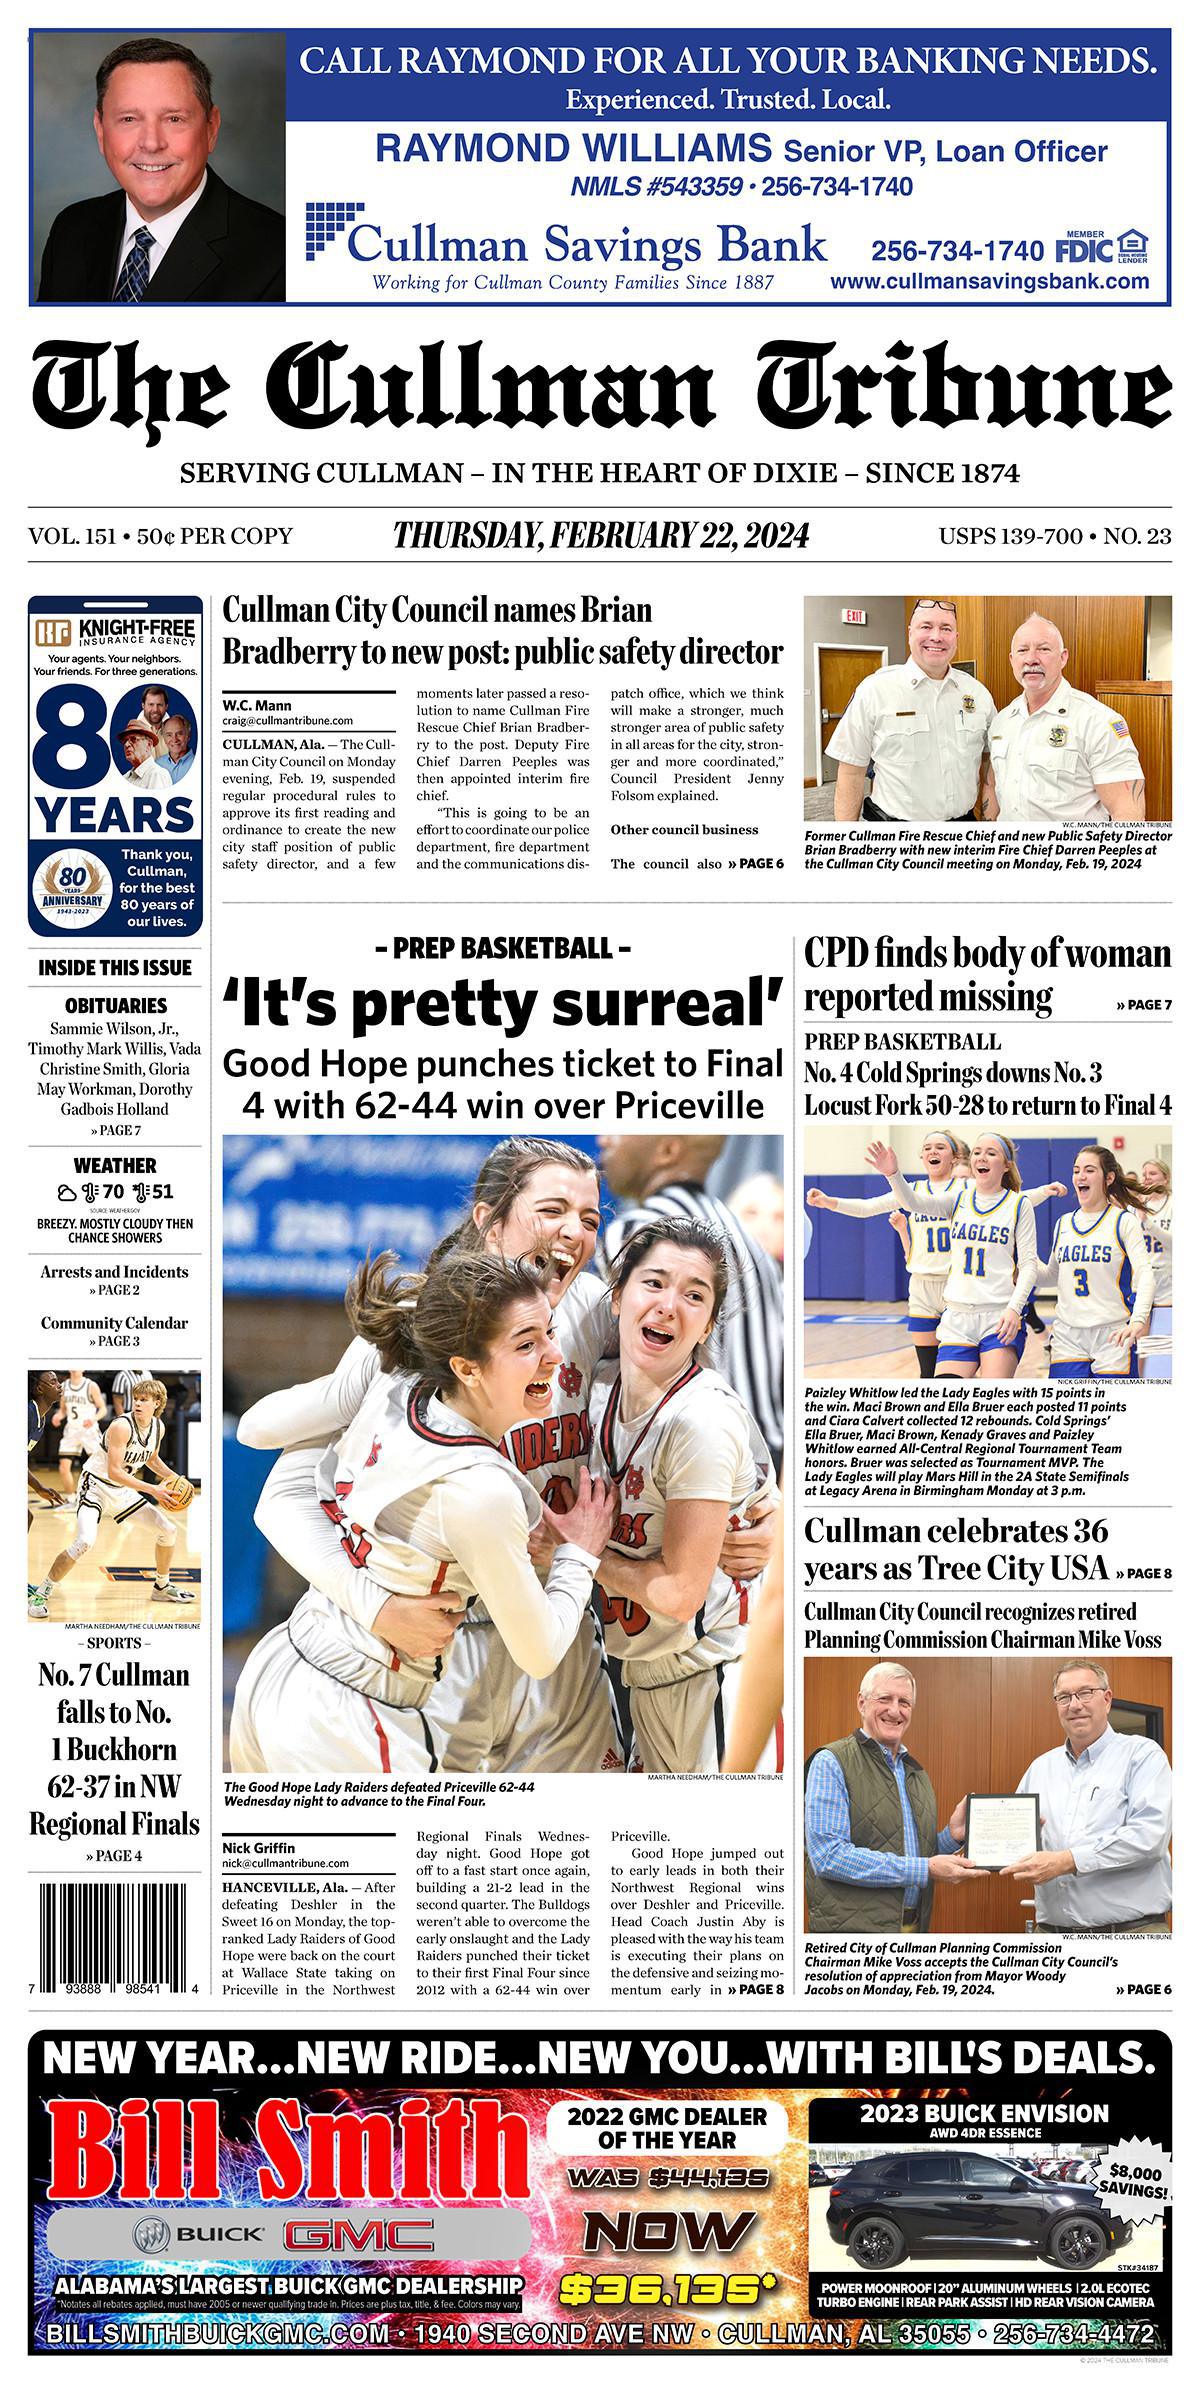 Good Morning Cullman! The 02-22-2024 edition of the Cullman Tribune is now ready to view.